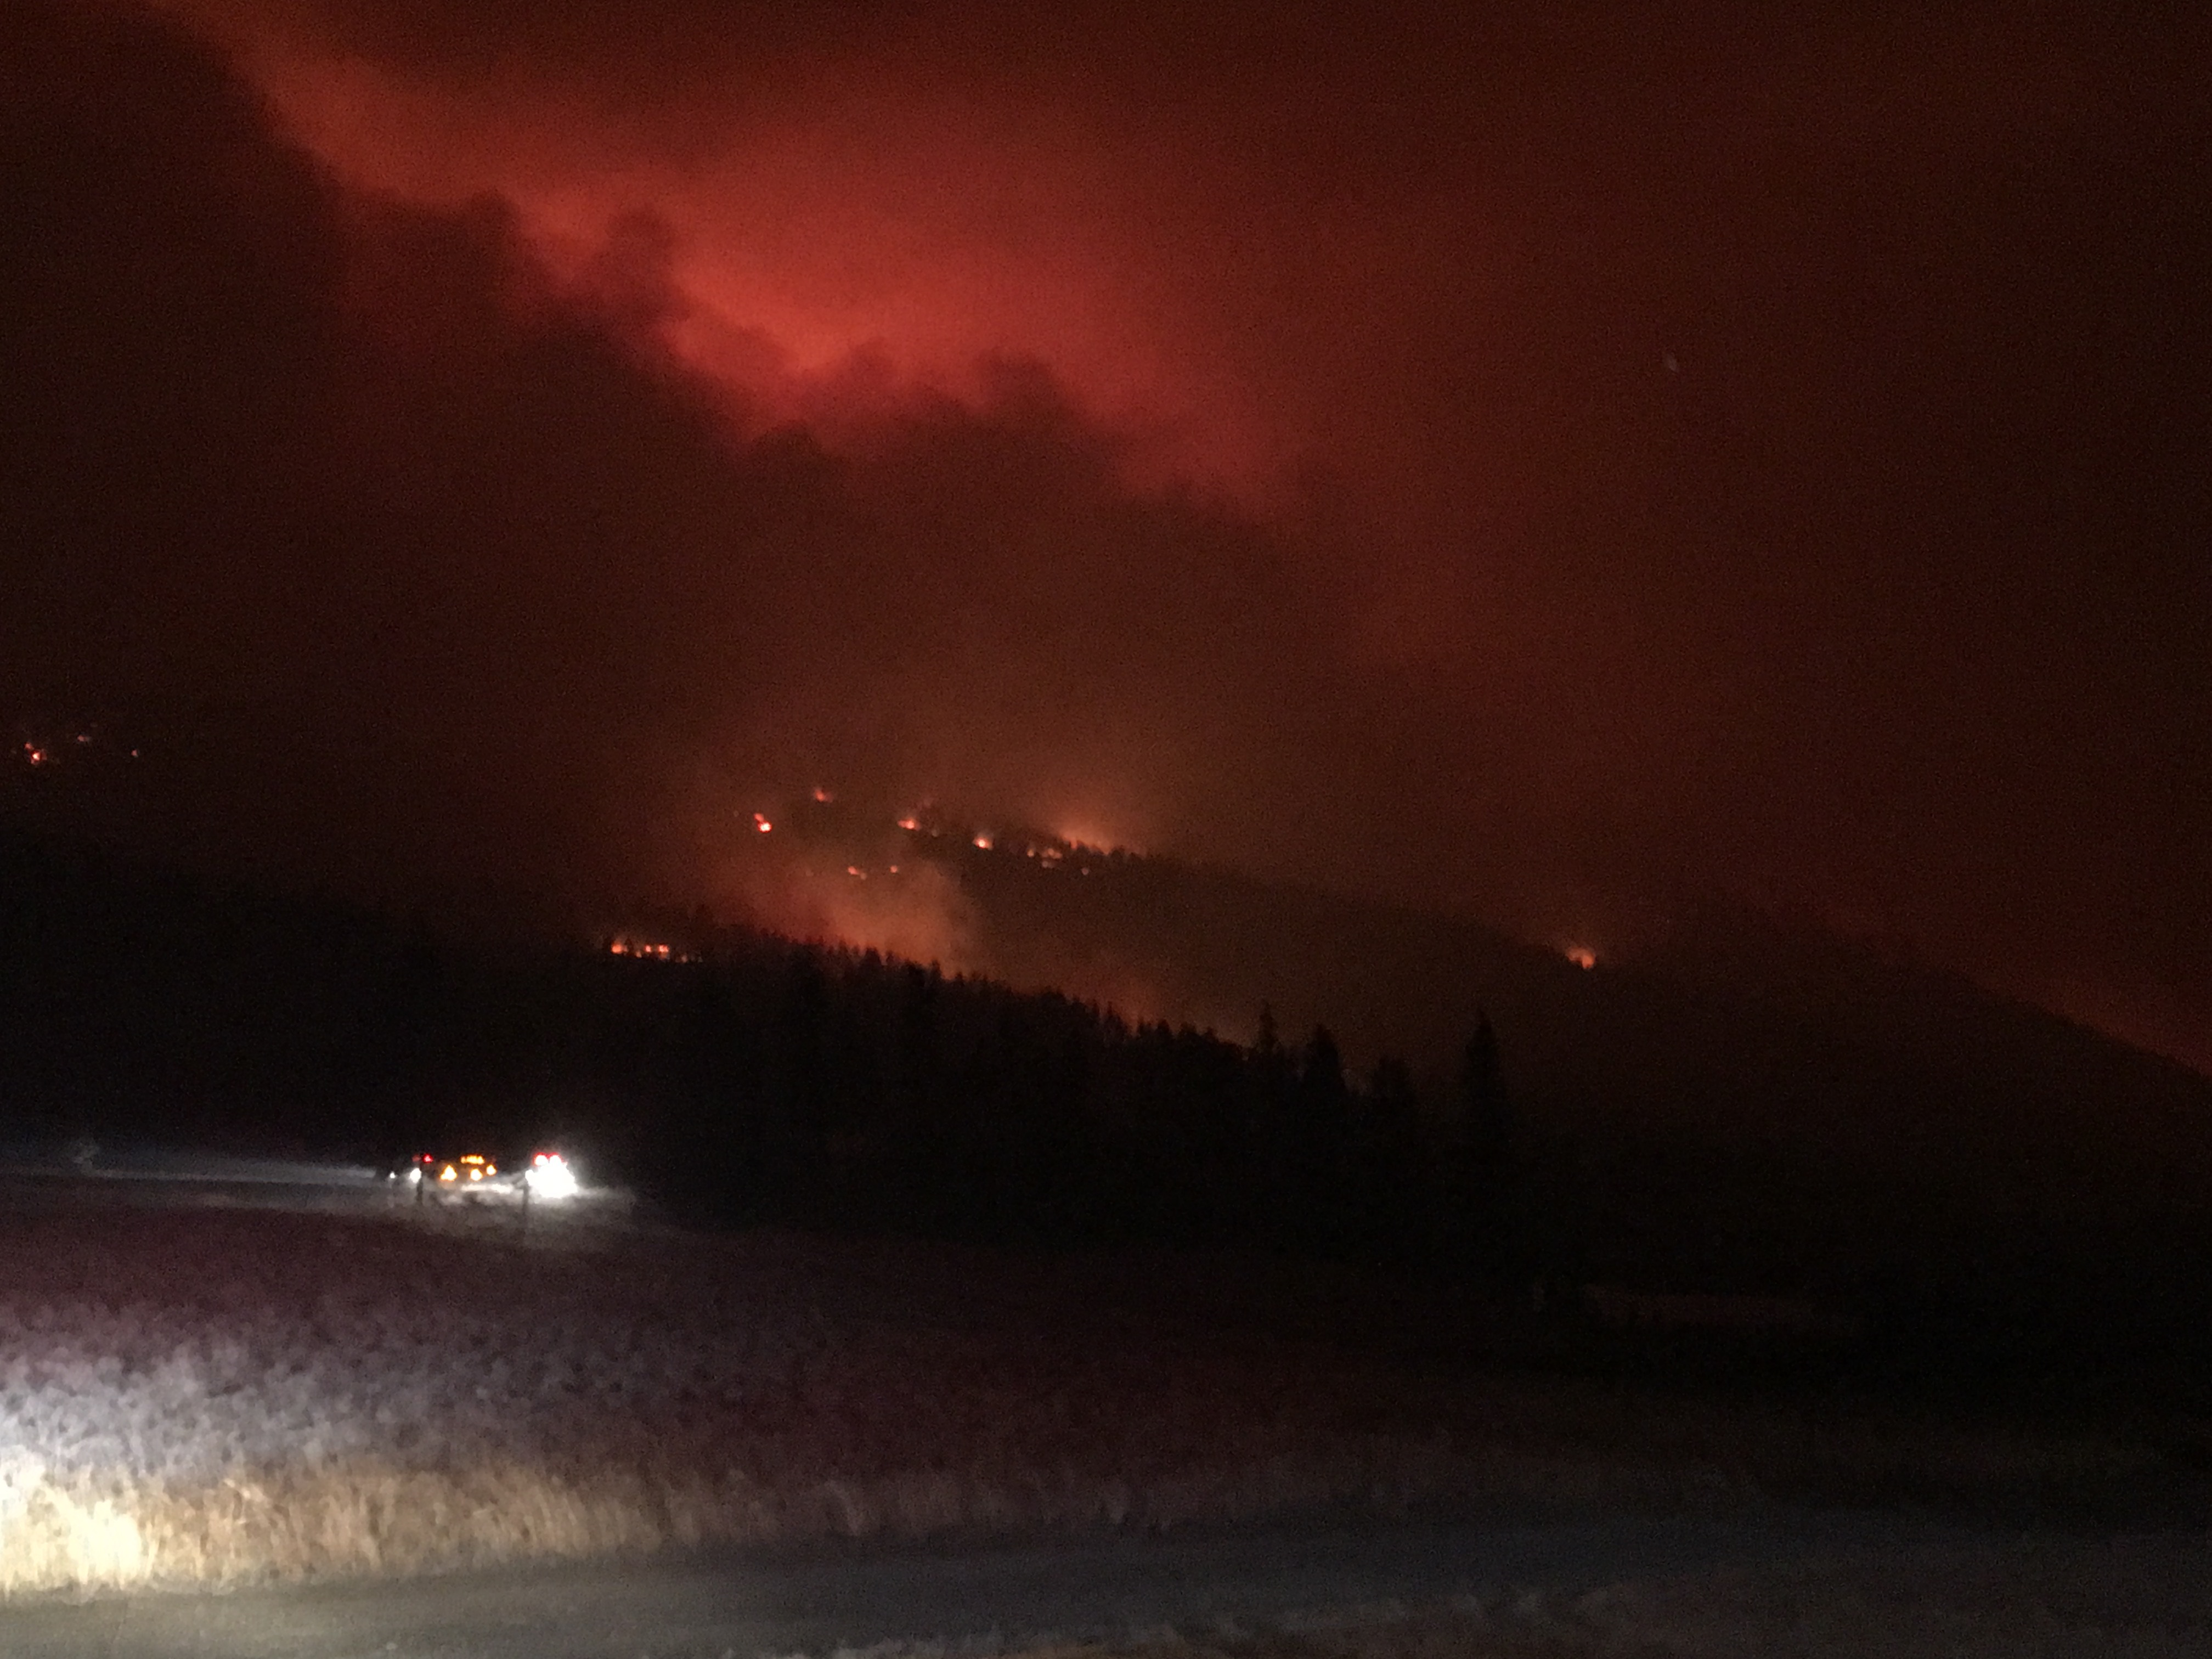 One of Bryan’s pictures of a wildfire scorching the hills of Montana at night.